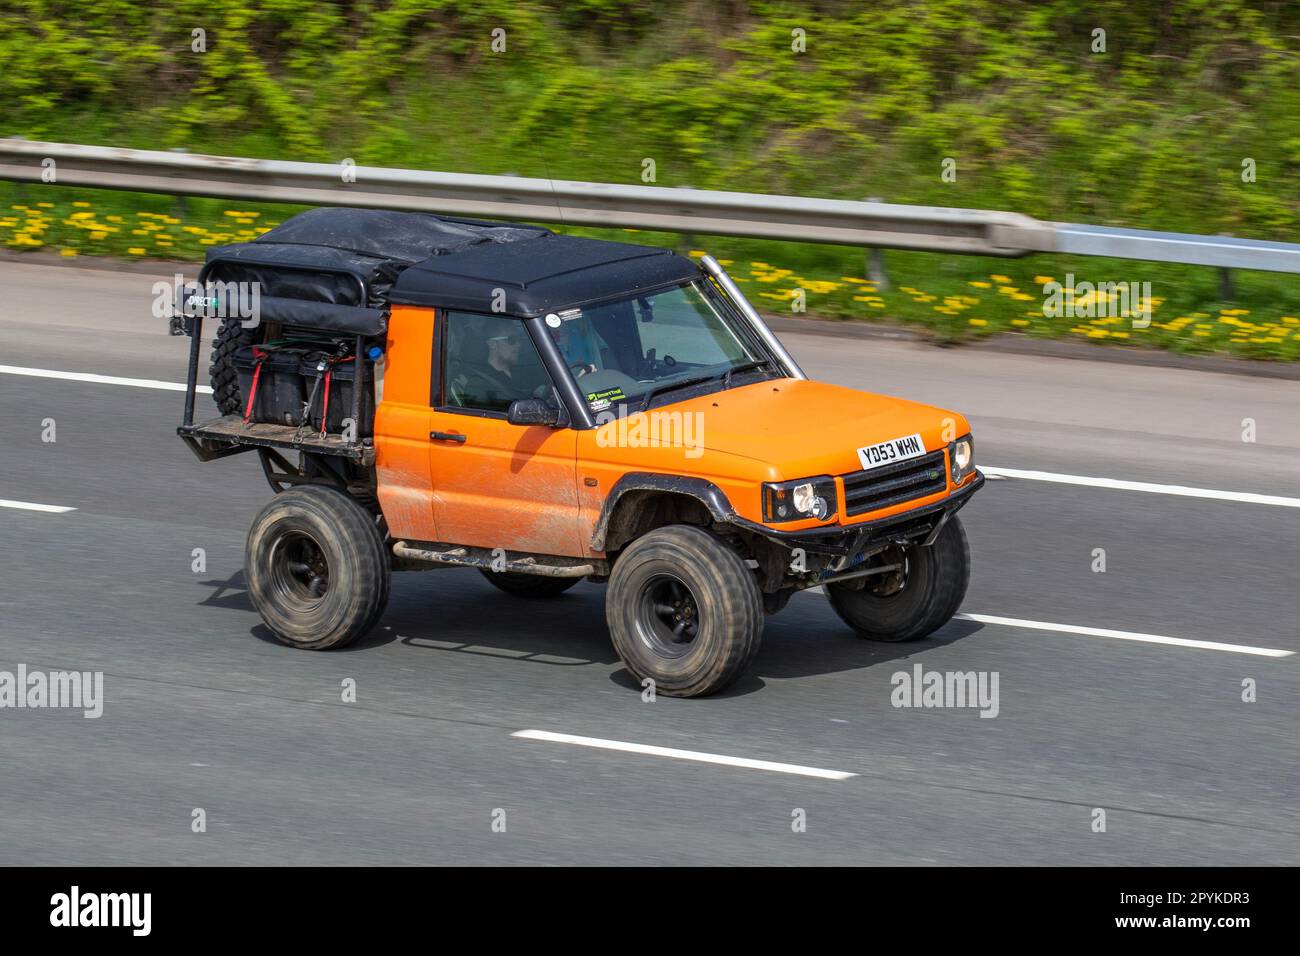 Land Rover Discovery Td5 Gs Td5 138 Gold Car Hardtop Diesel 2495 cc;  Peculiar Unusual Modified radically altered, 2dr, two door, 2 door,   travelling on the M61 motorway UK Stock Photo